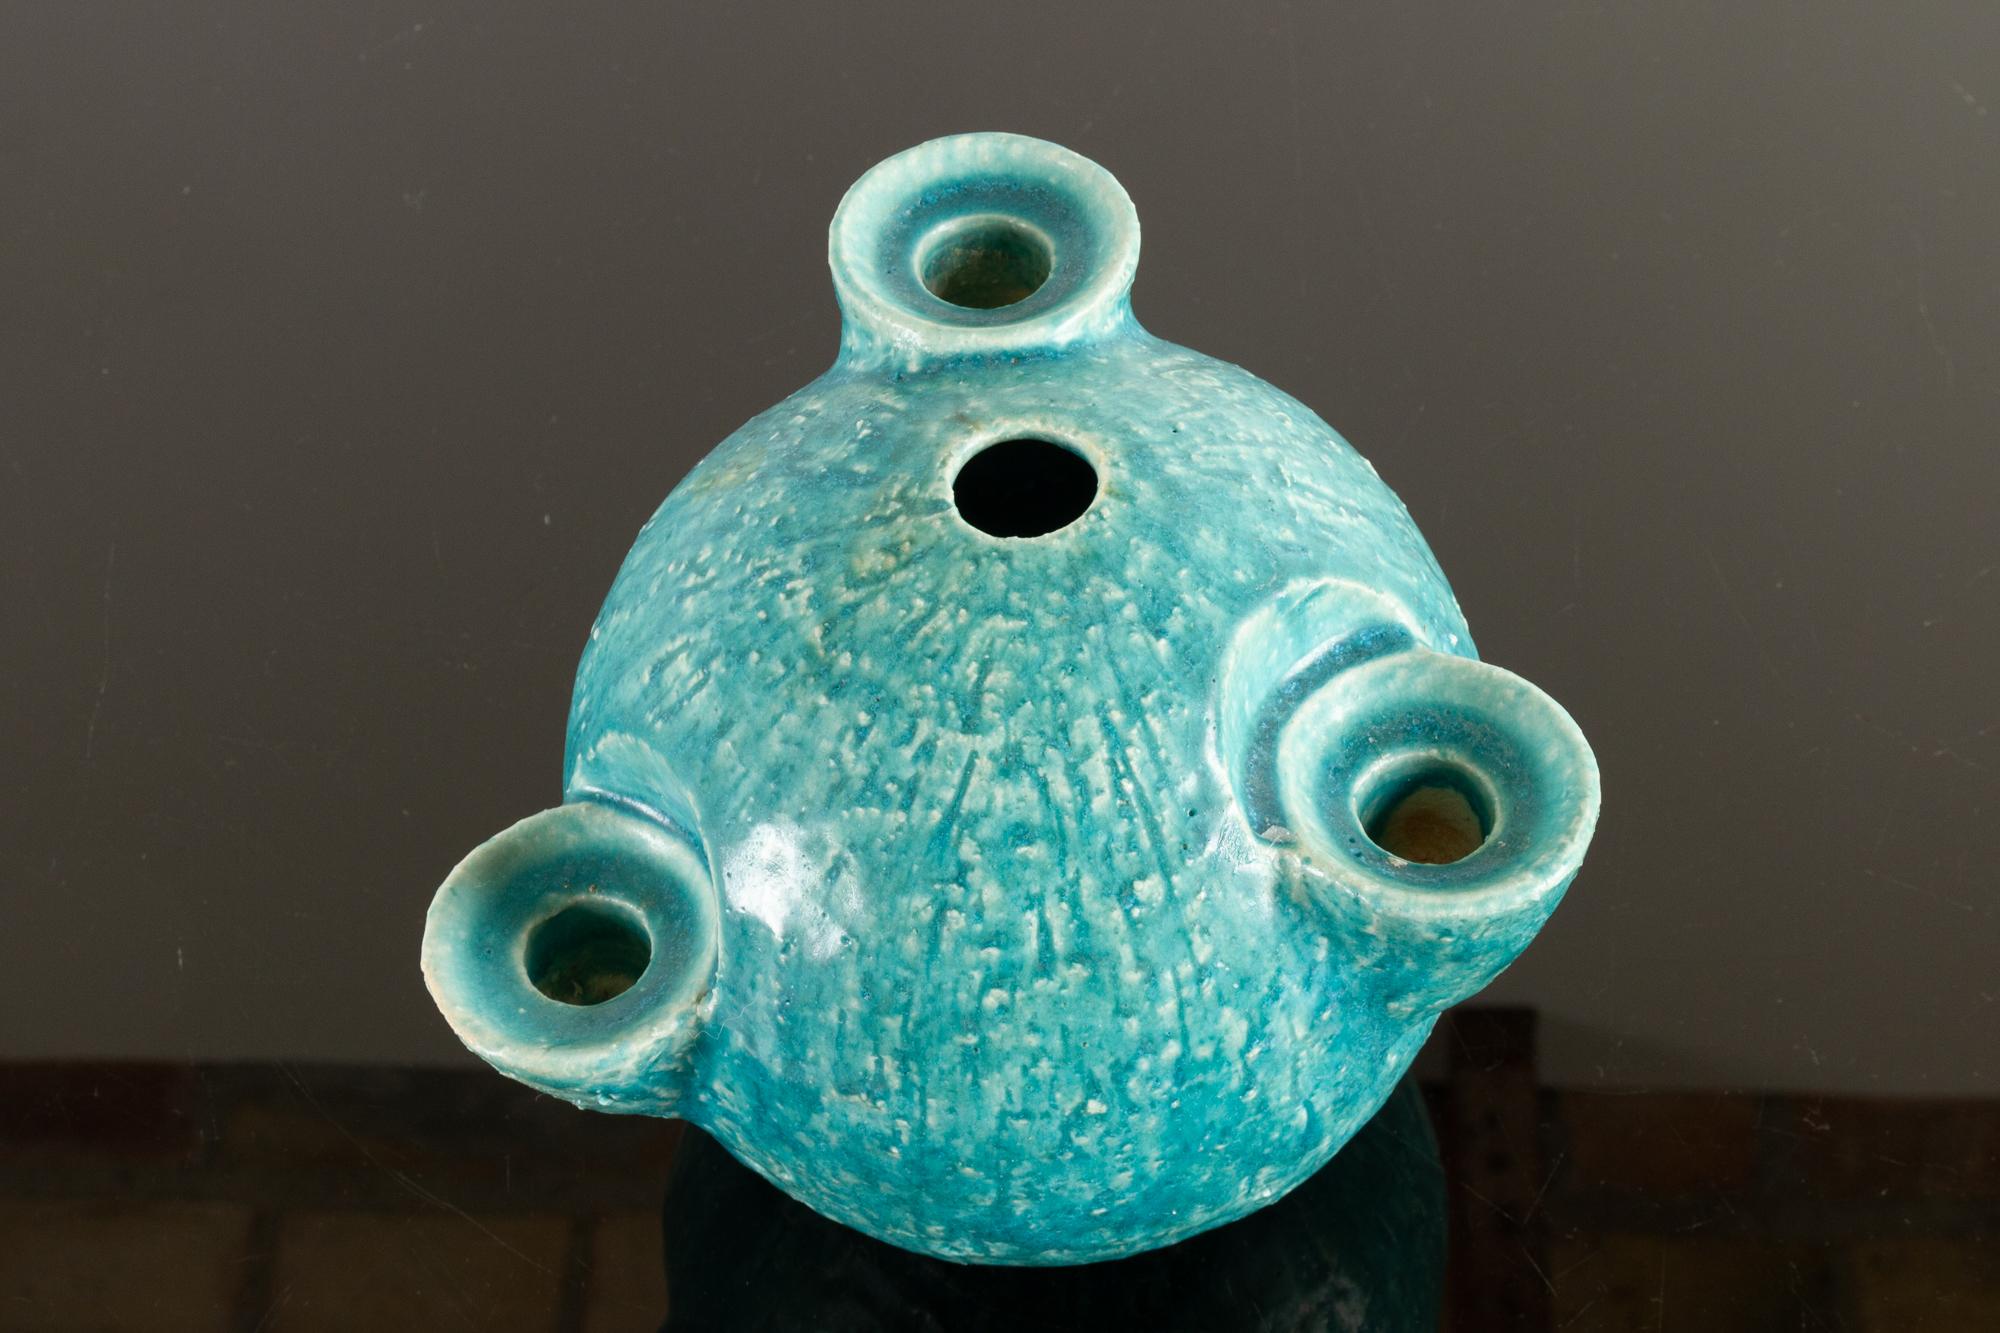 Vintage Danish candleholder by Sejer Keramik, 1960s
One of a kind large ceramic candleholder and vase in turquoise glaze by Sejer Pottery in Denmark. Holds three 20 mm candles. Very beautiful organic design.
Very good condition. No damage.